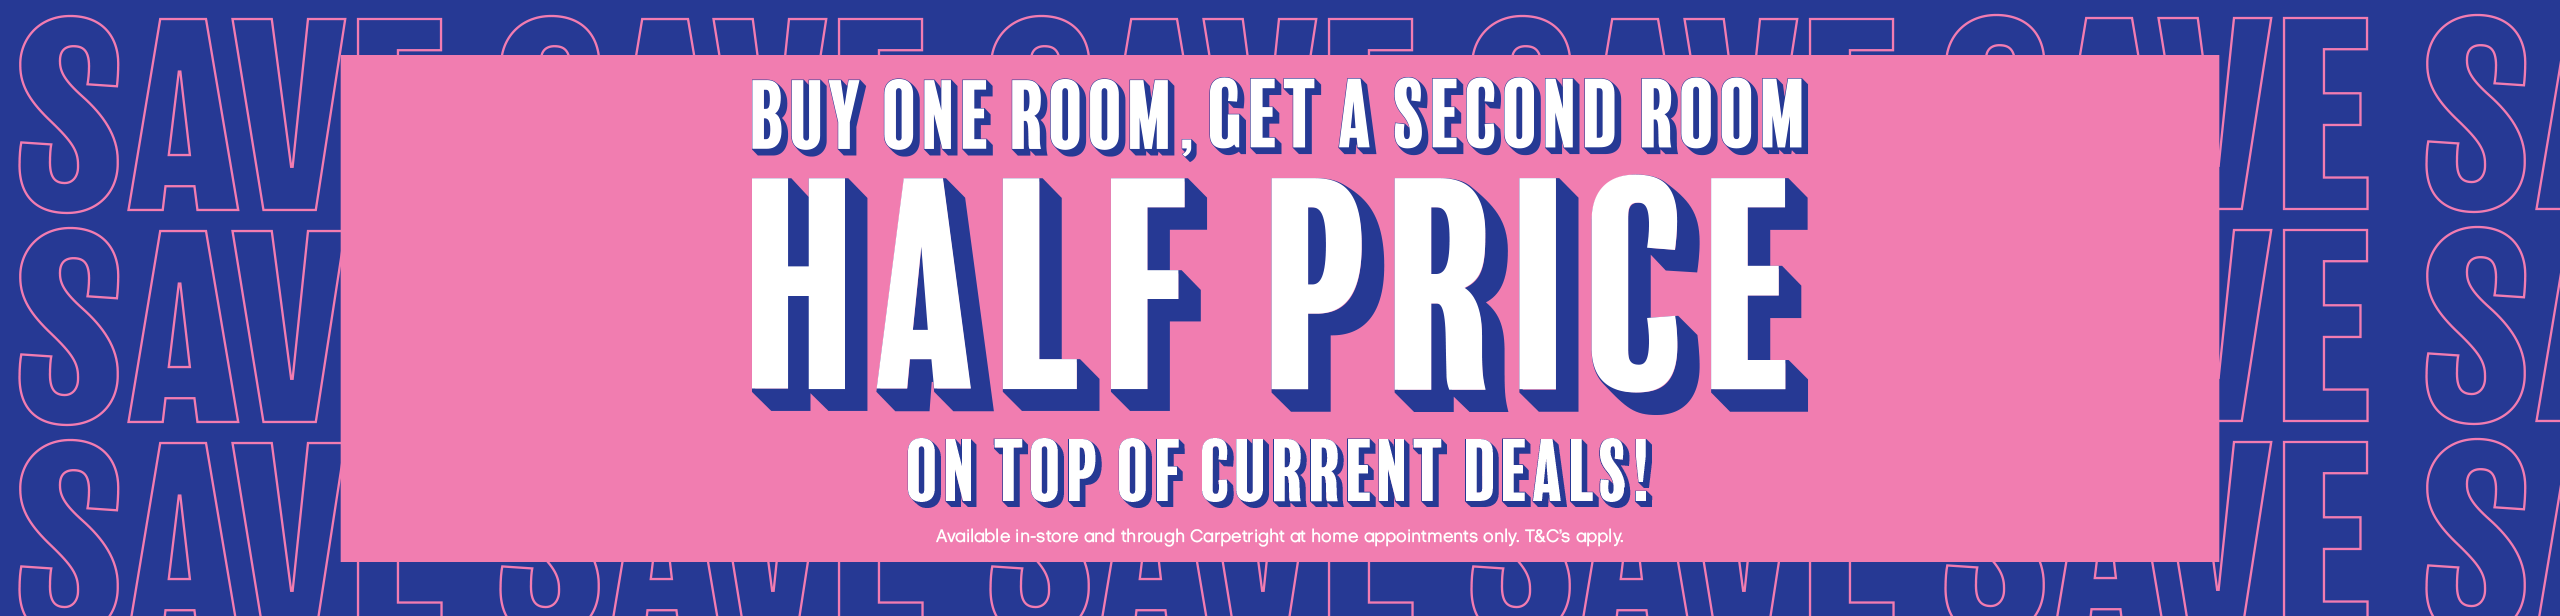 Buy one room, get a second room half price